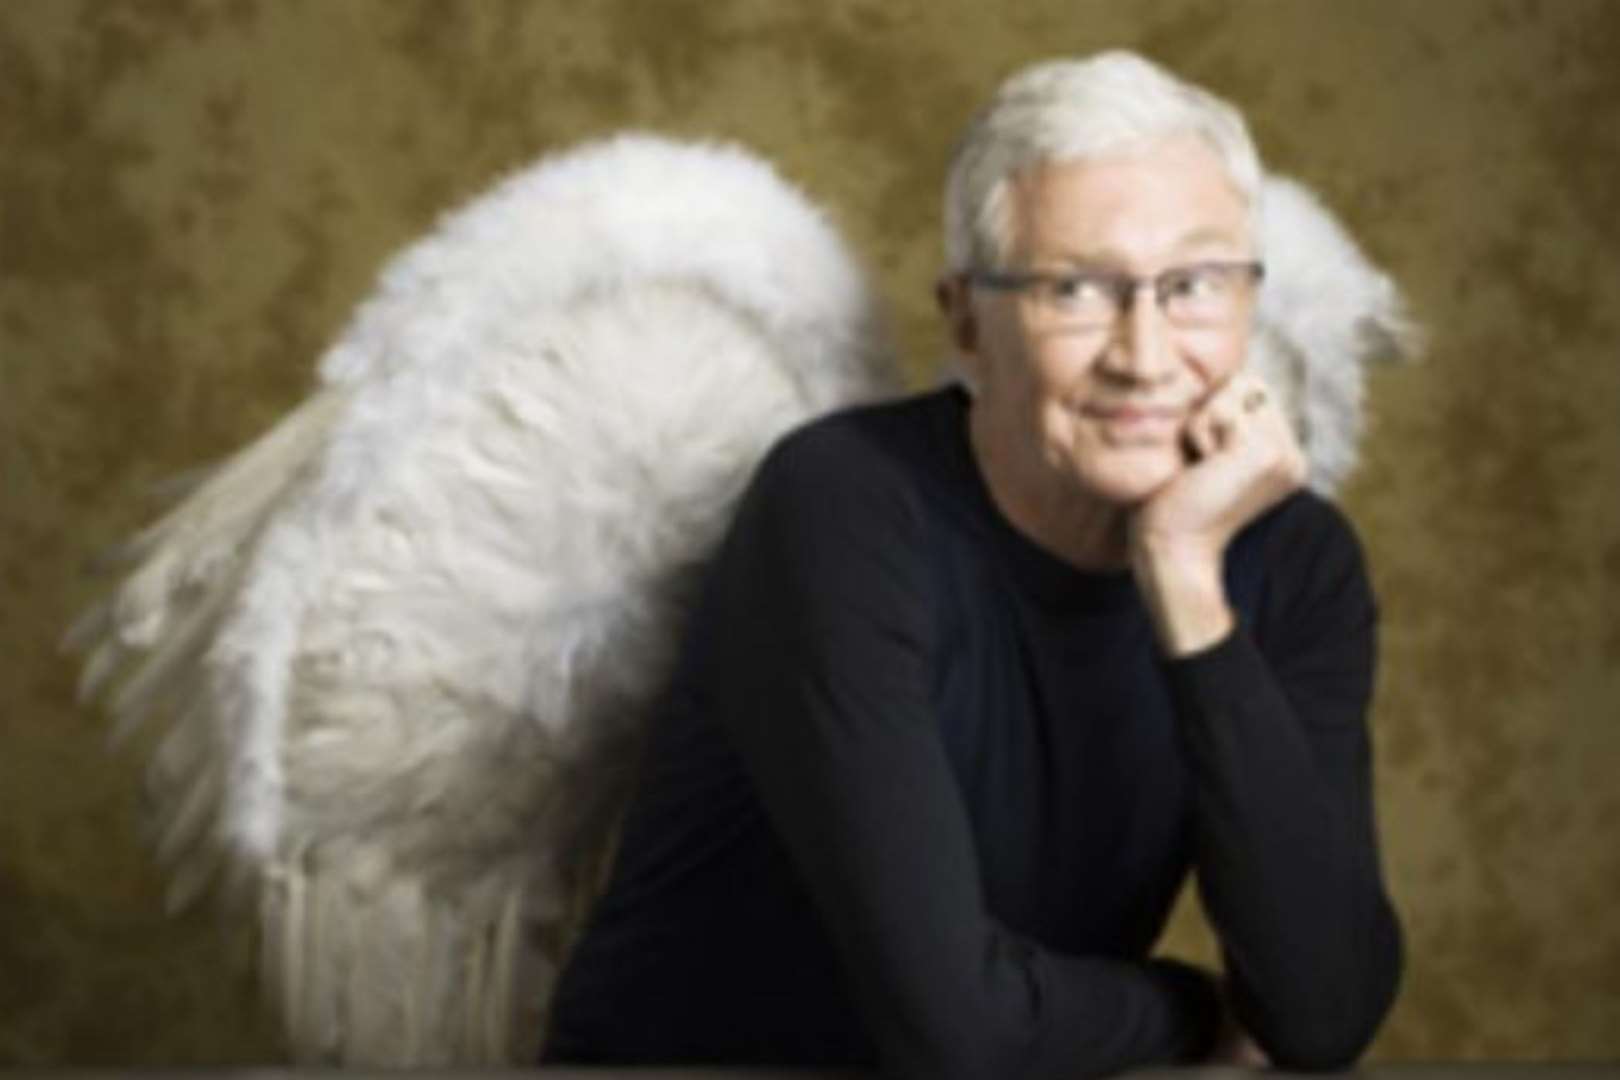 There will be a procession in Aldington for Paul O'Grady on Thursday. Picture: Andre Portasio